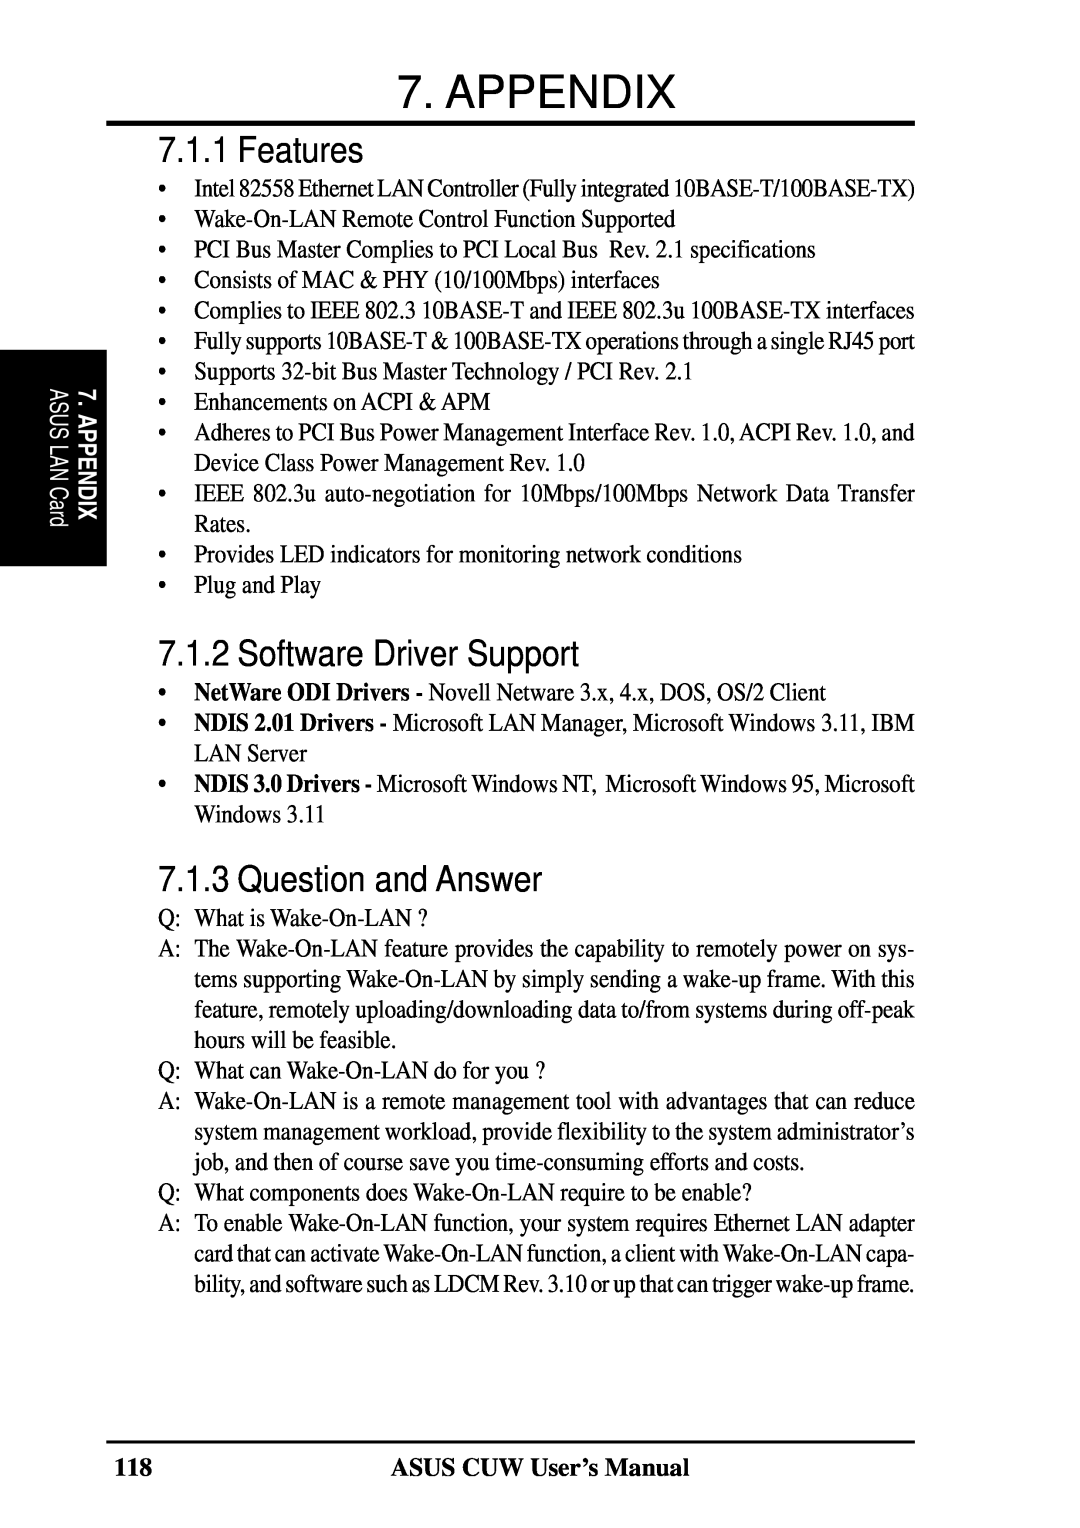 Asus 810 user manual Features, Software Driver Support, Question and Answer, Appendix 